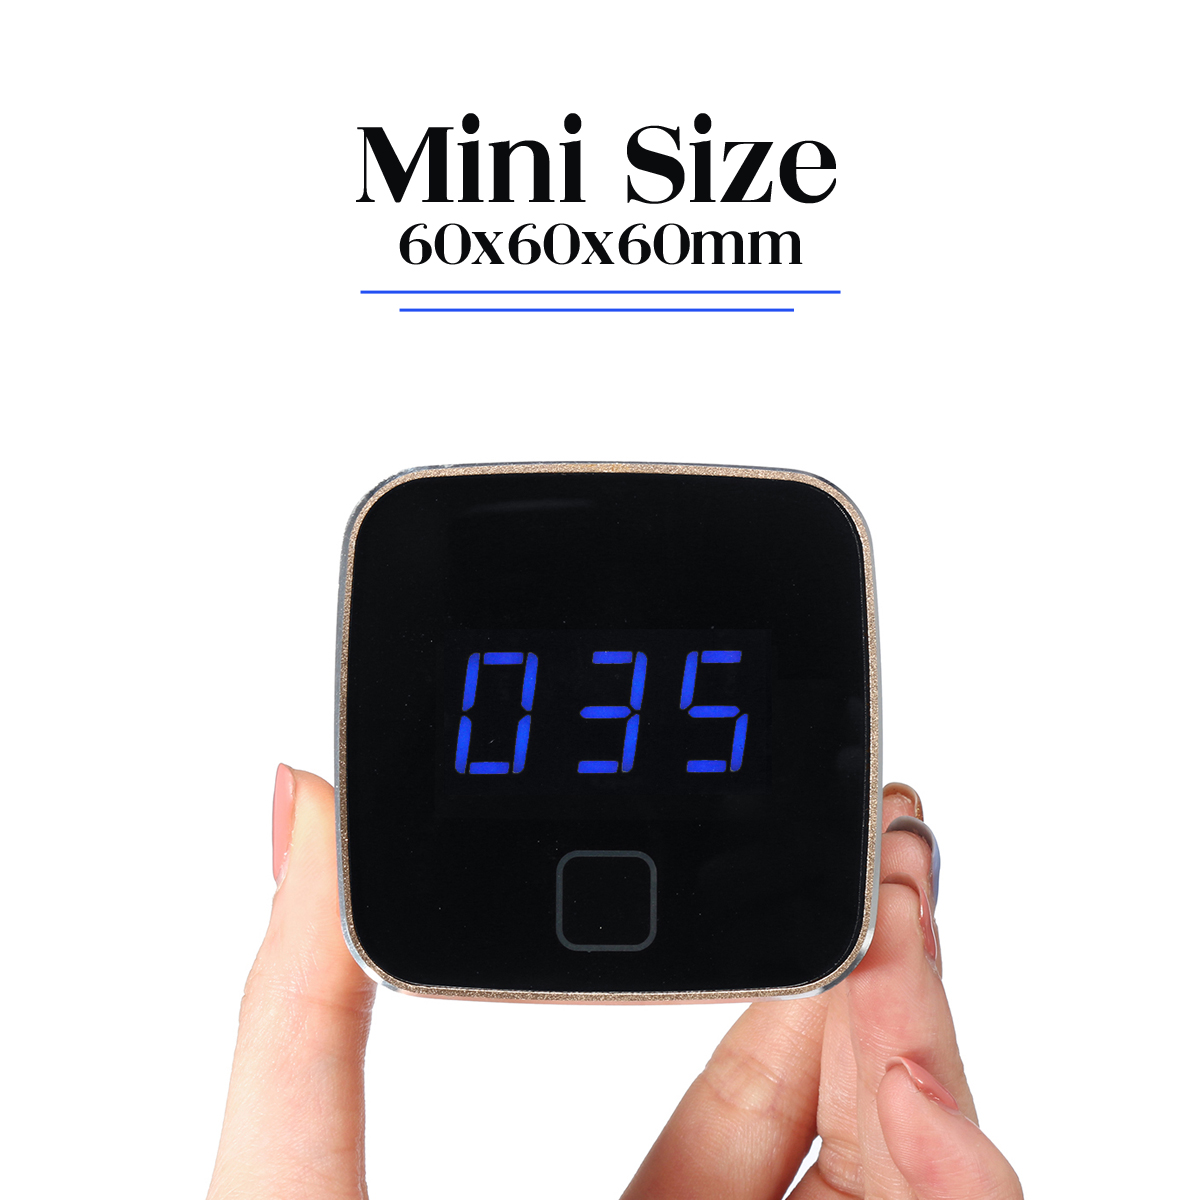 Mini-PM25-Air-Quality-Tester-Particulate-Meter-Monitor-Rechargeable-1431394-4